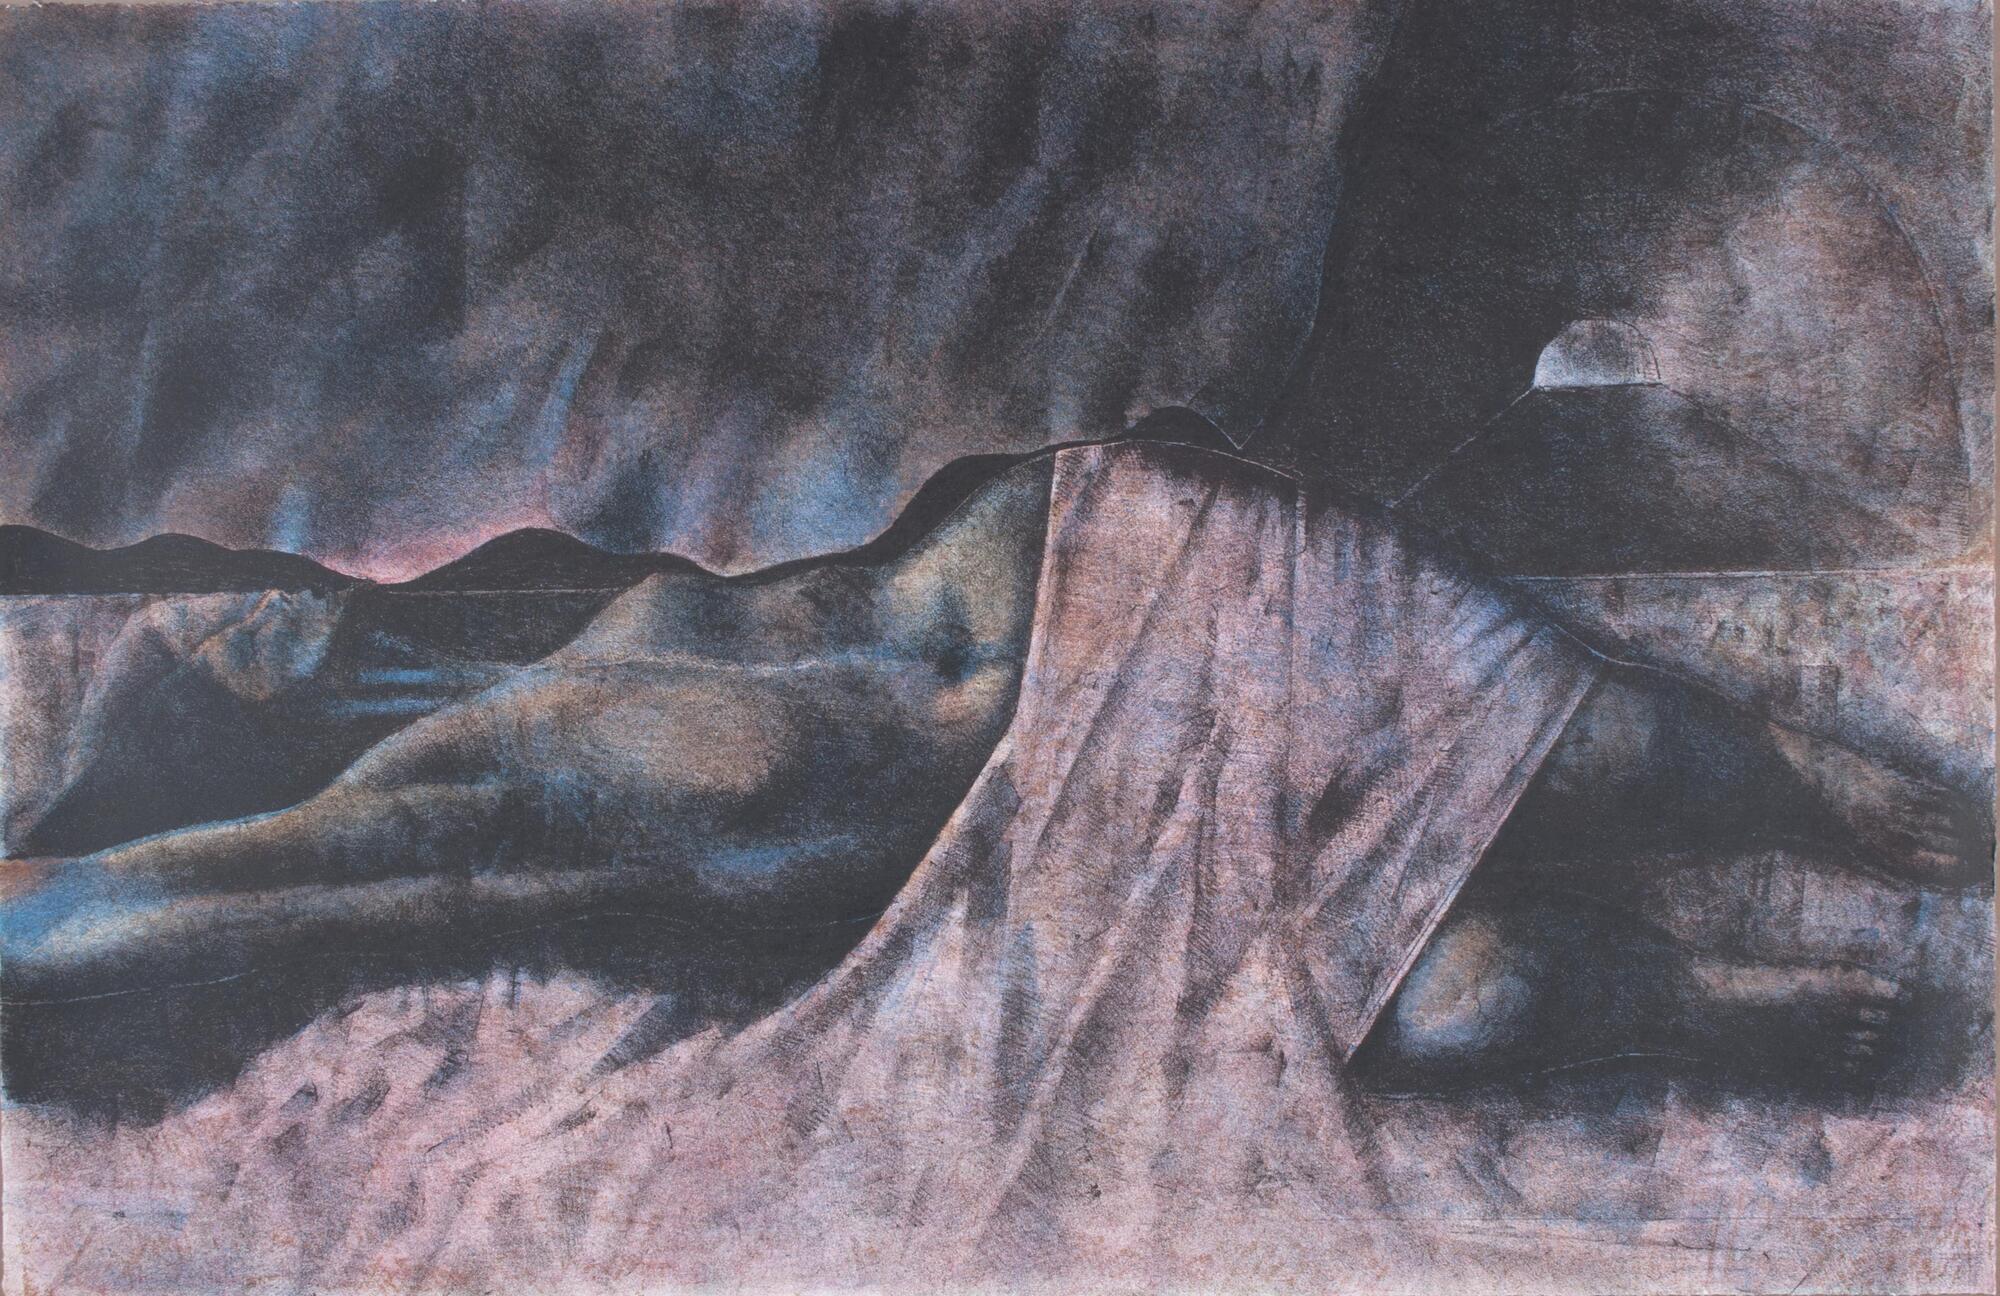 Horizontal image filled by reclining female nude, legs and feet to the right, torso and head to the left. The figure's torso lower torso to the knees covered with pink sheet. 